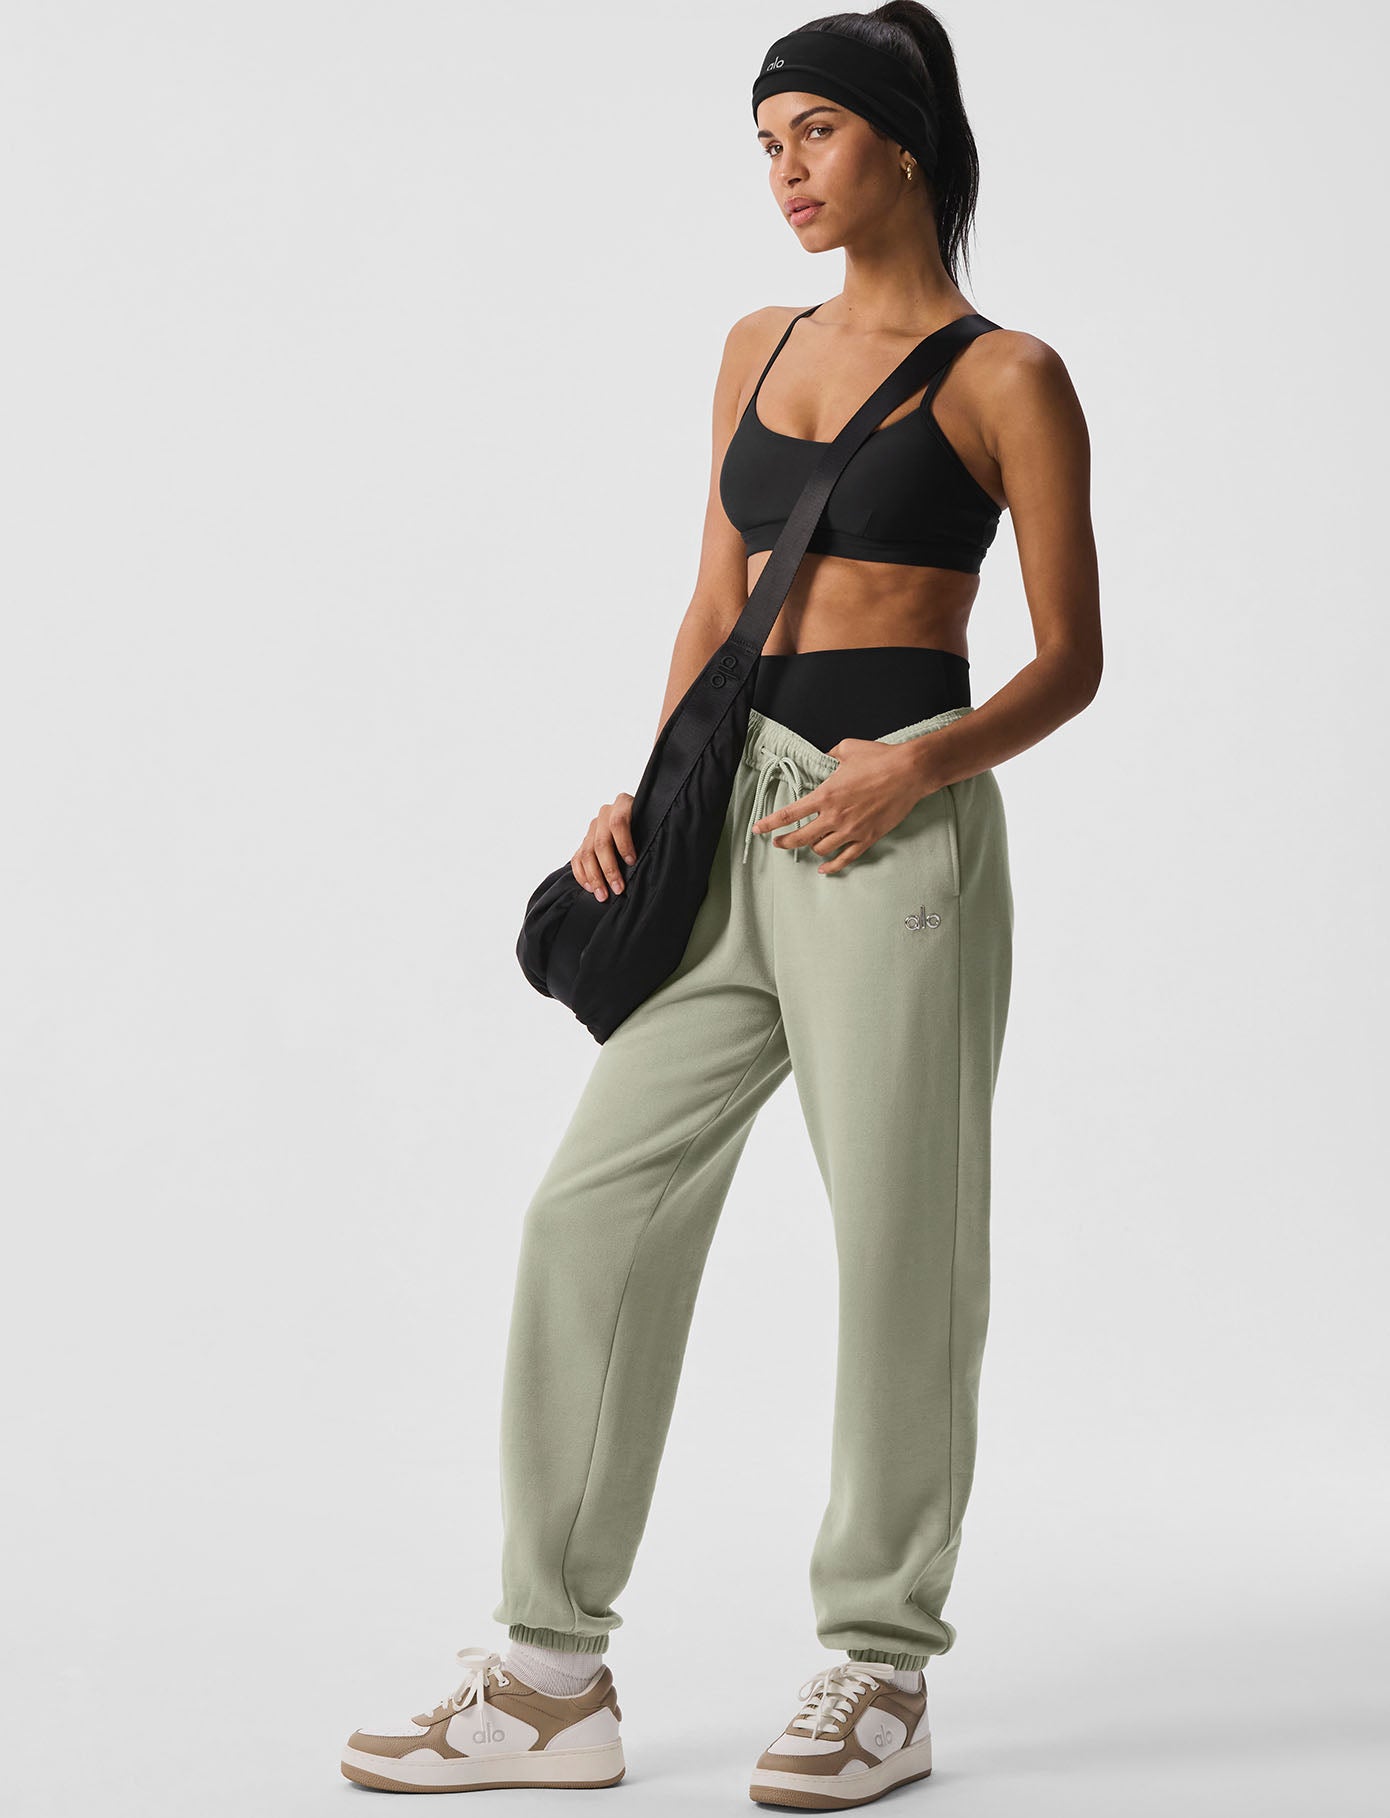 Alo Yoga  Yoga leggings, clothes, and accessories for studio to